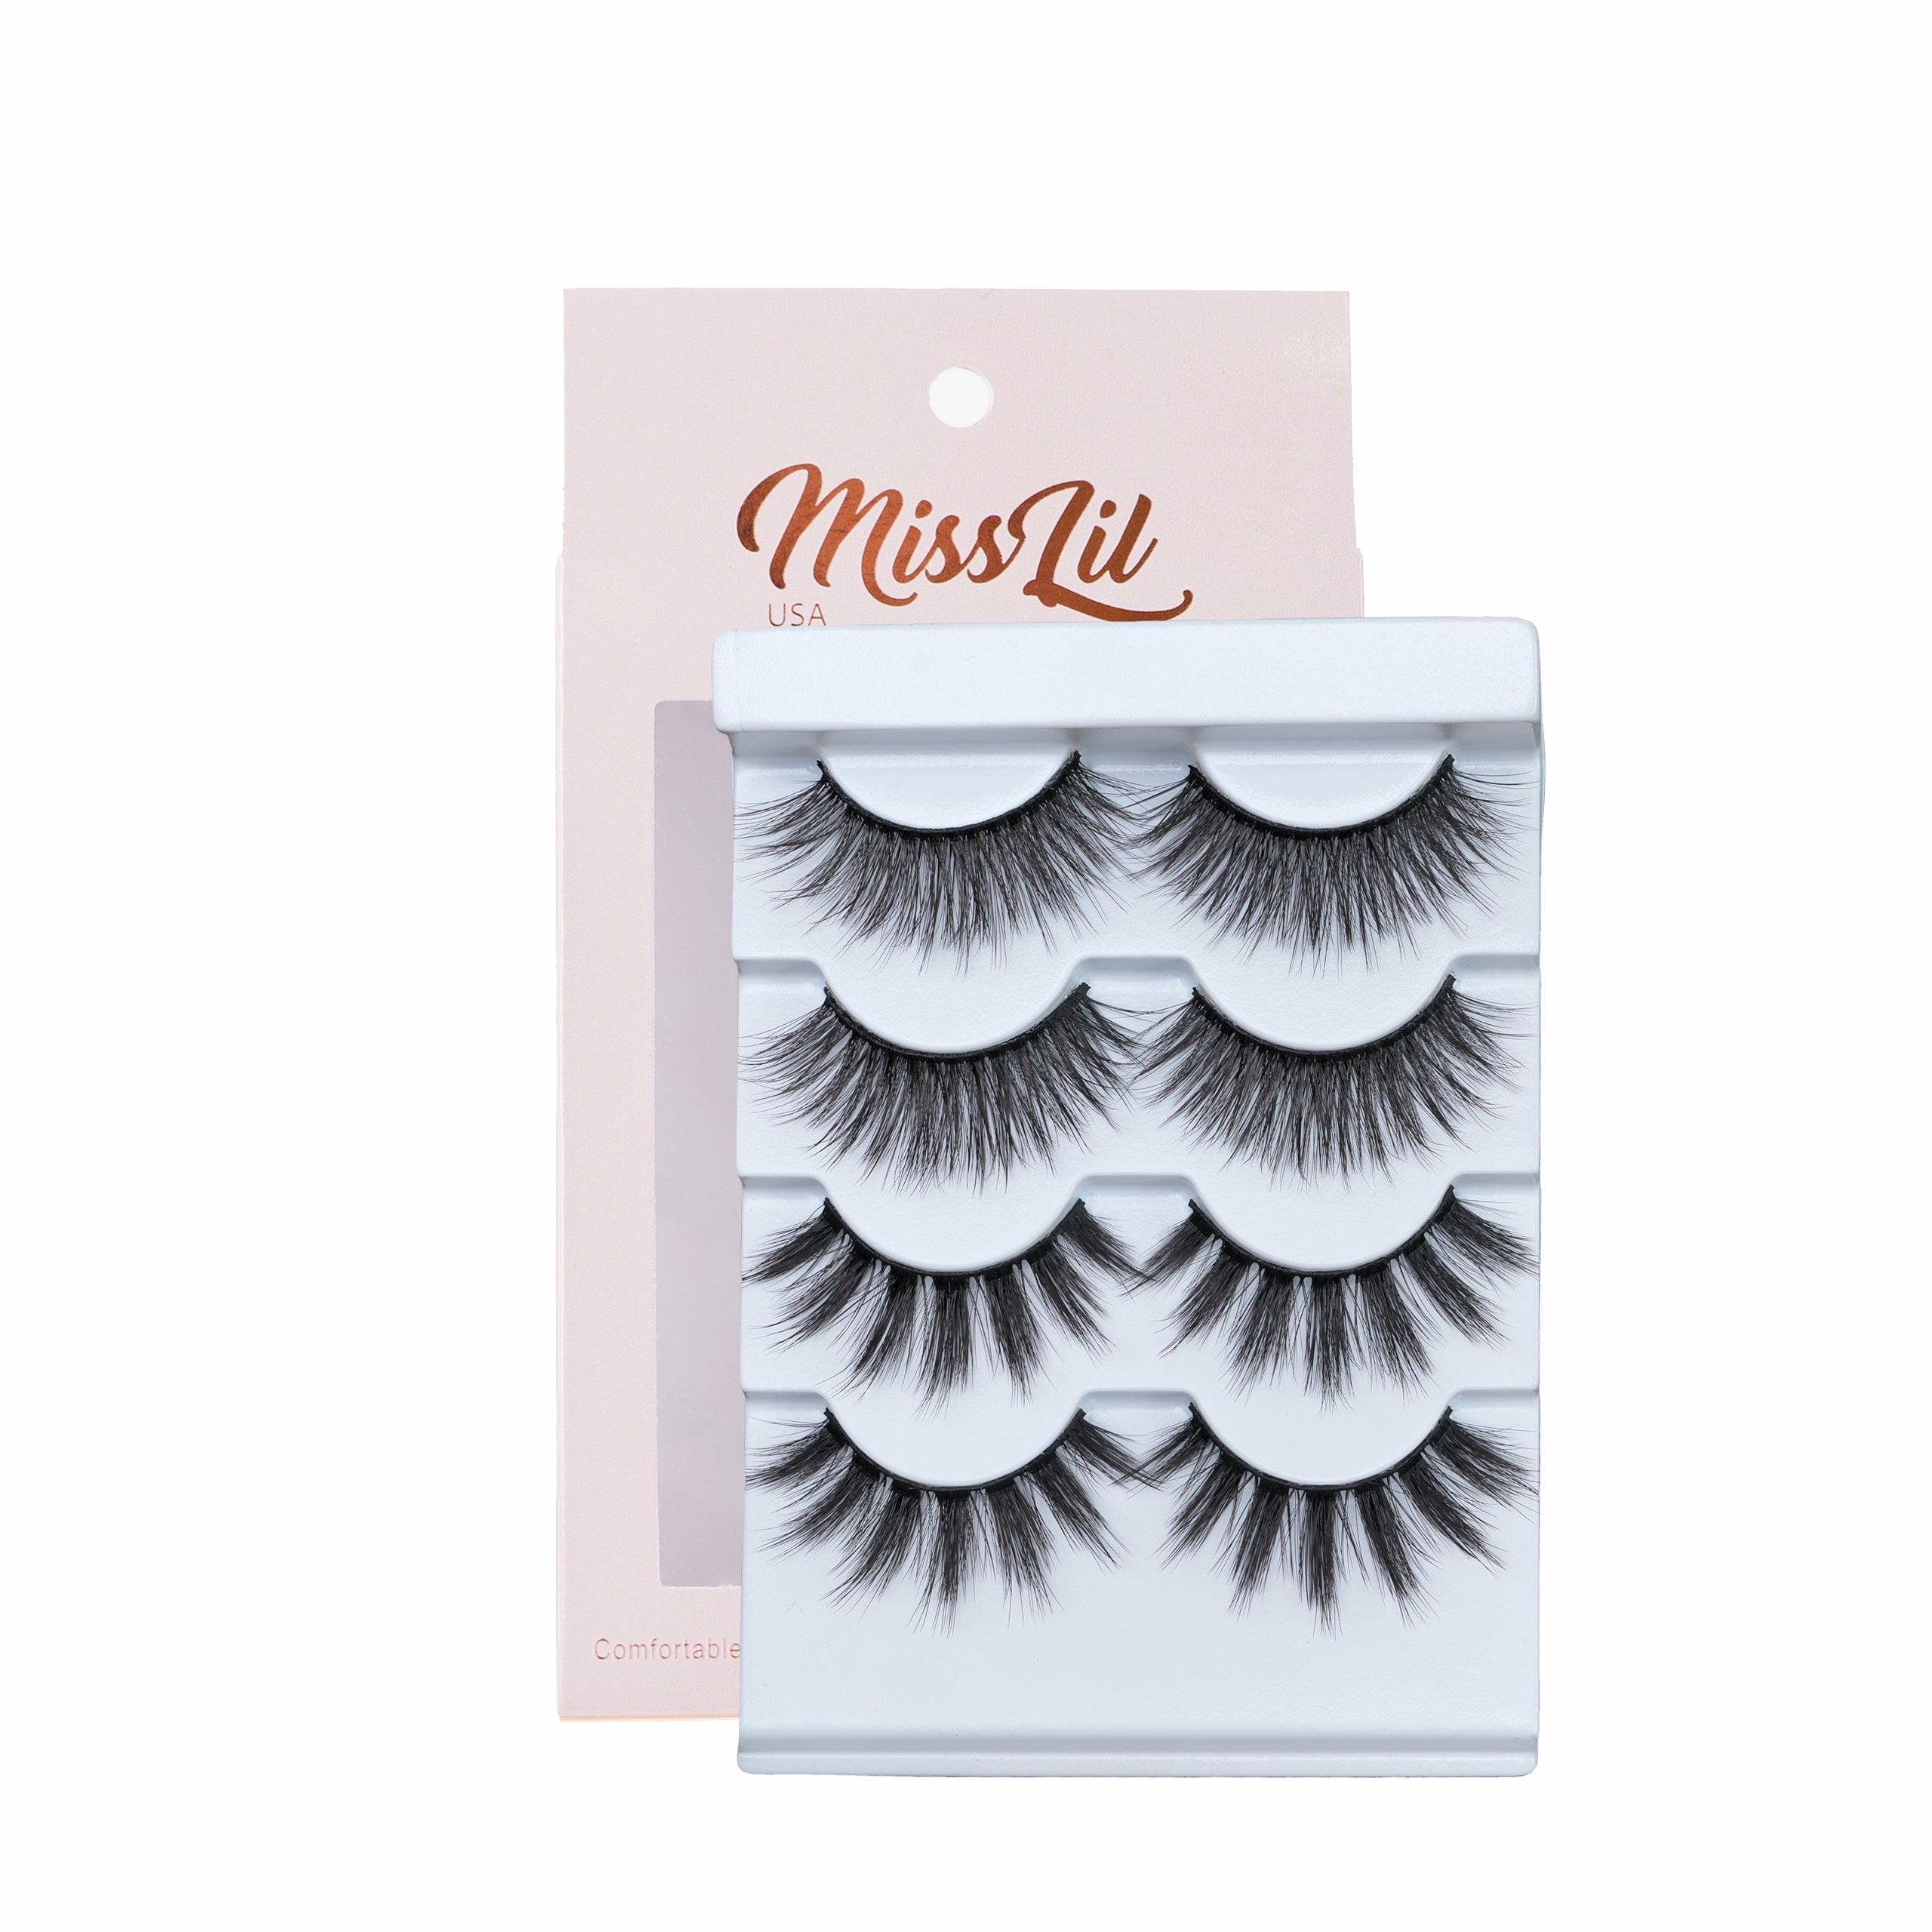 4 Pairs Lashes - Classic Collection #7 - Miss Lil USA